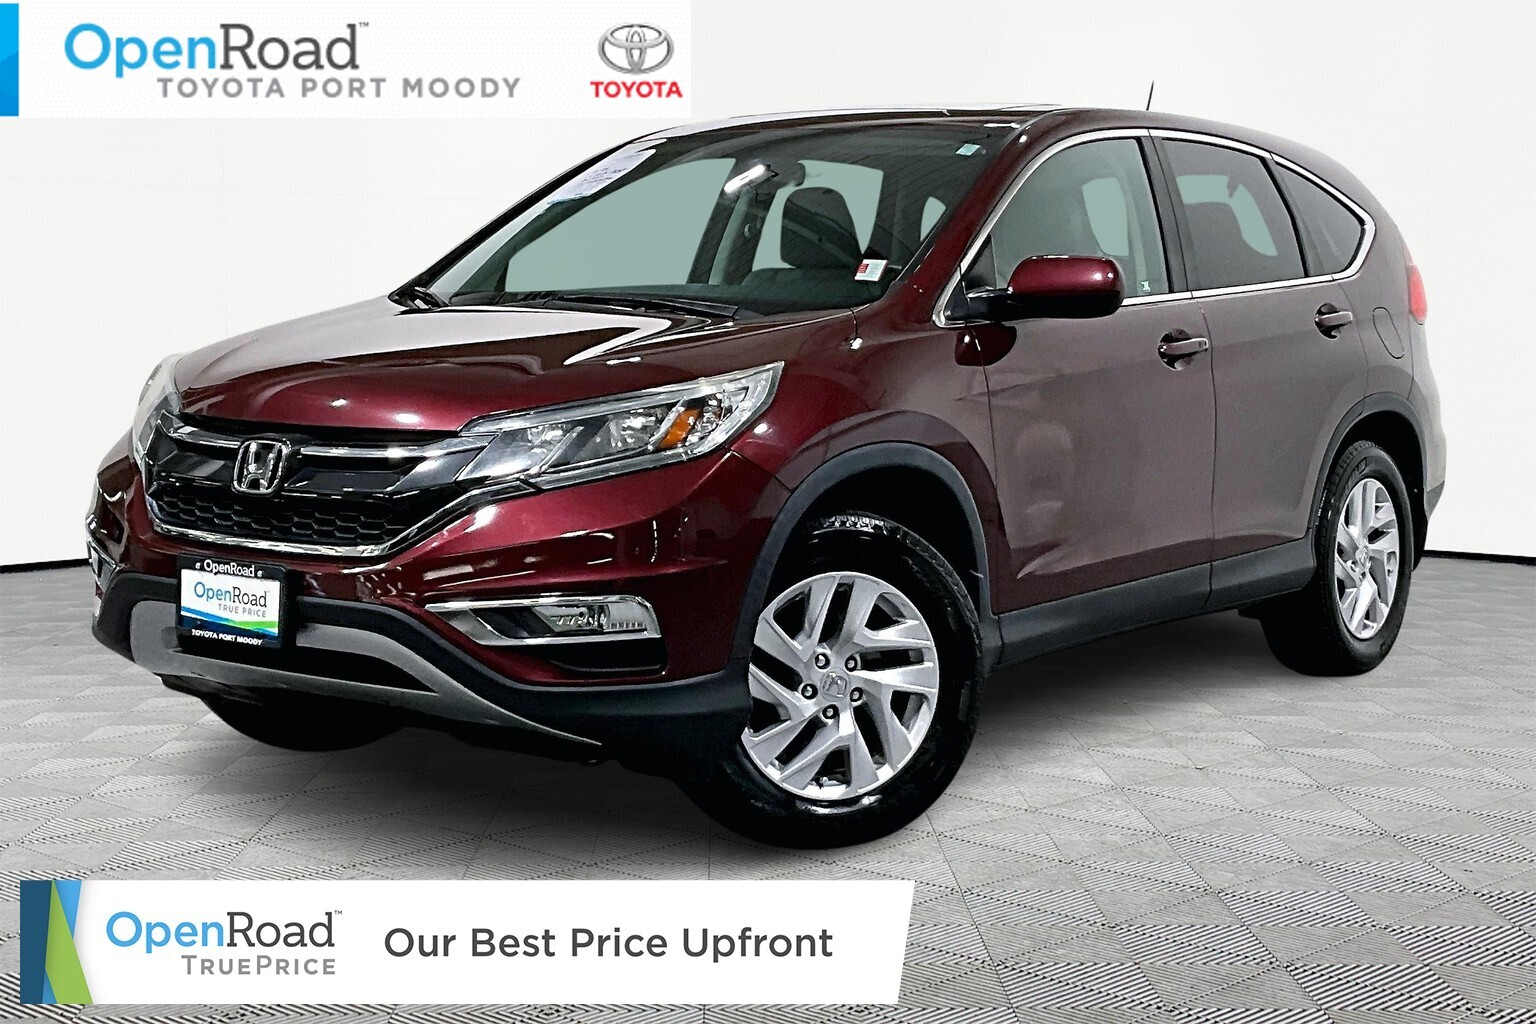 2015 Honda CR-V EX-L AWD |OpenRoad True Price |Local |One Owner |F